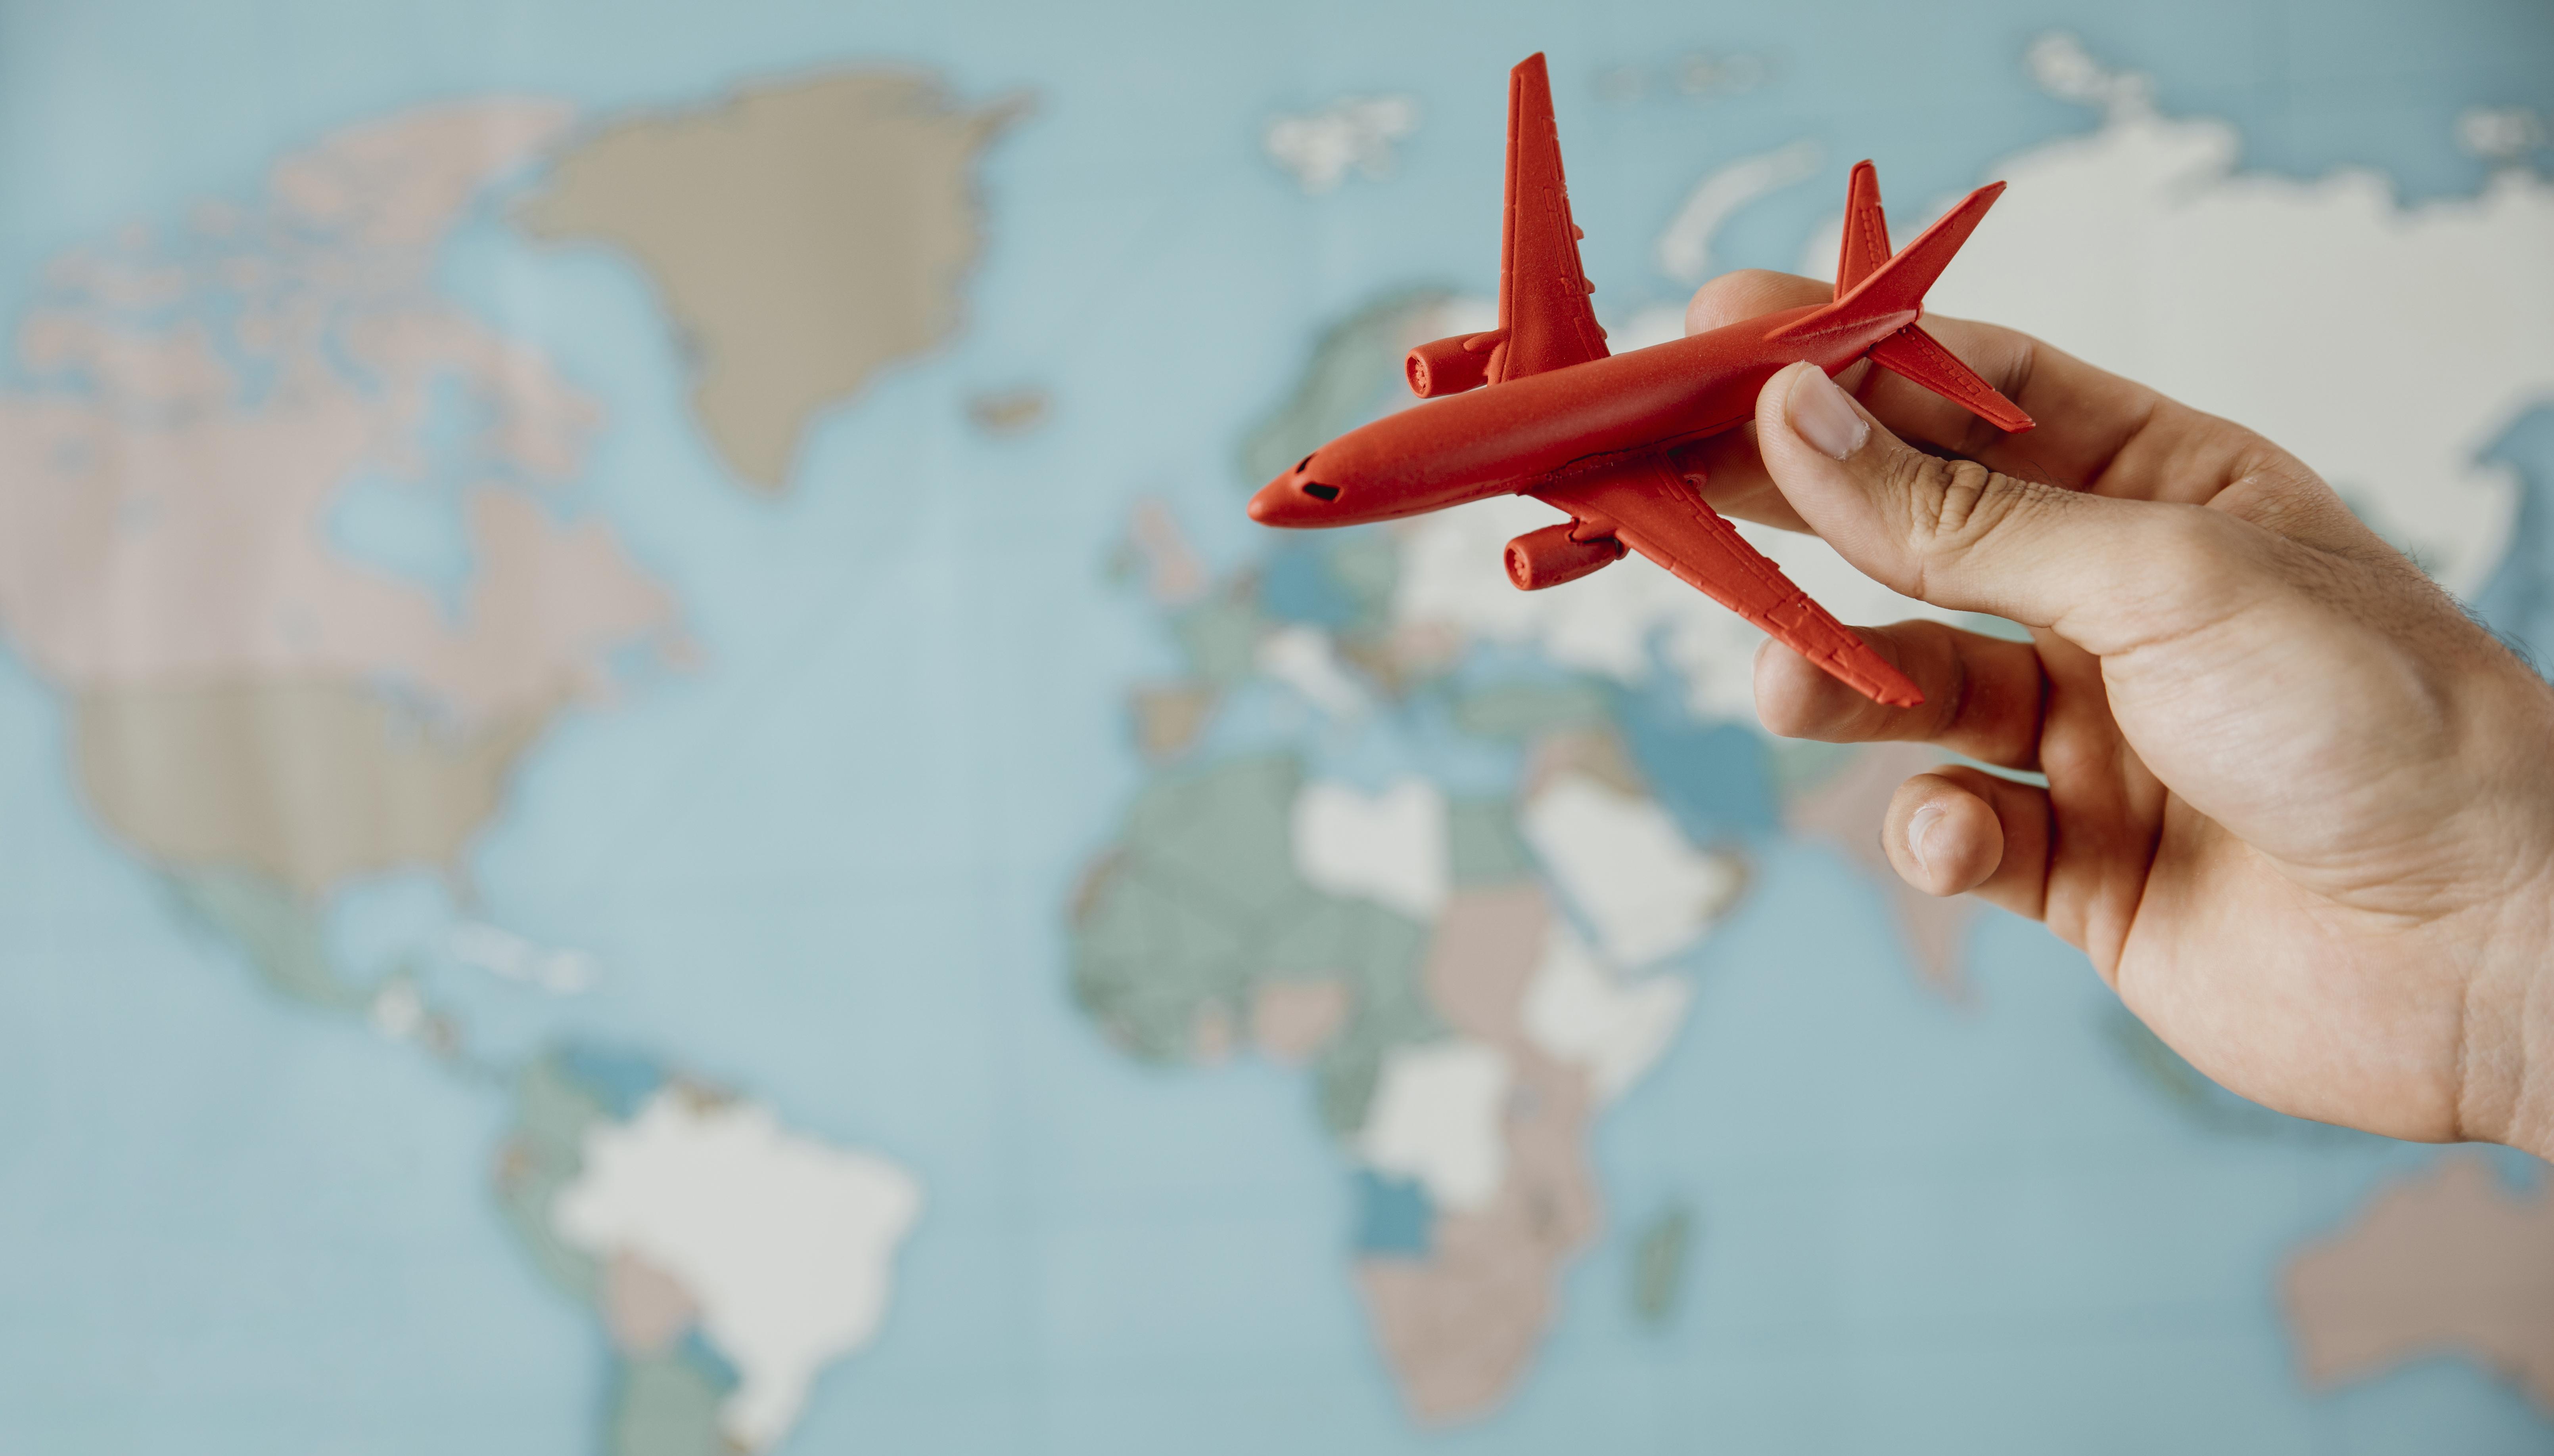 side-view-person-holding-airplane-figurine-map